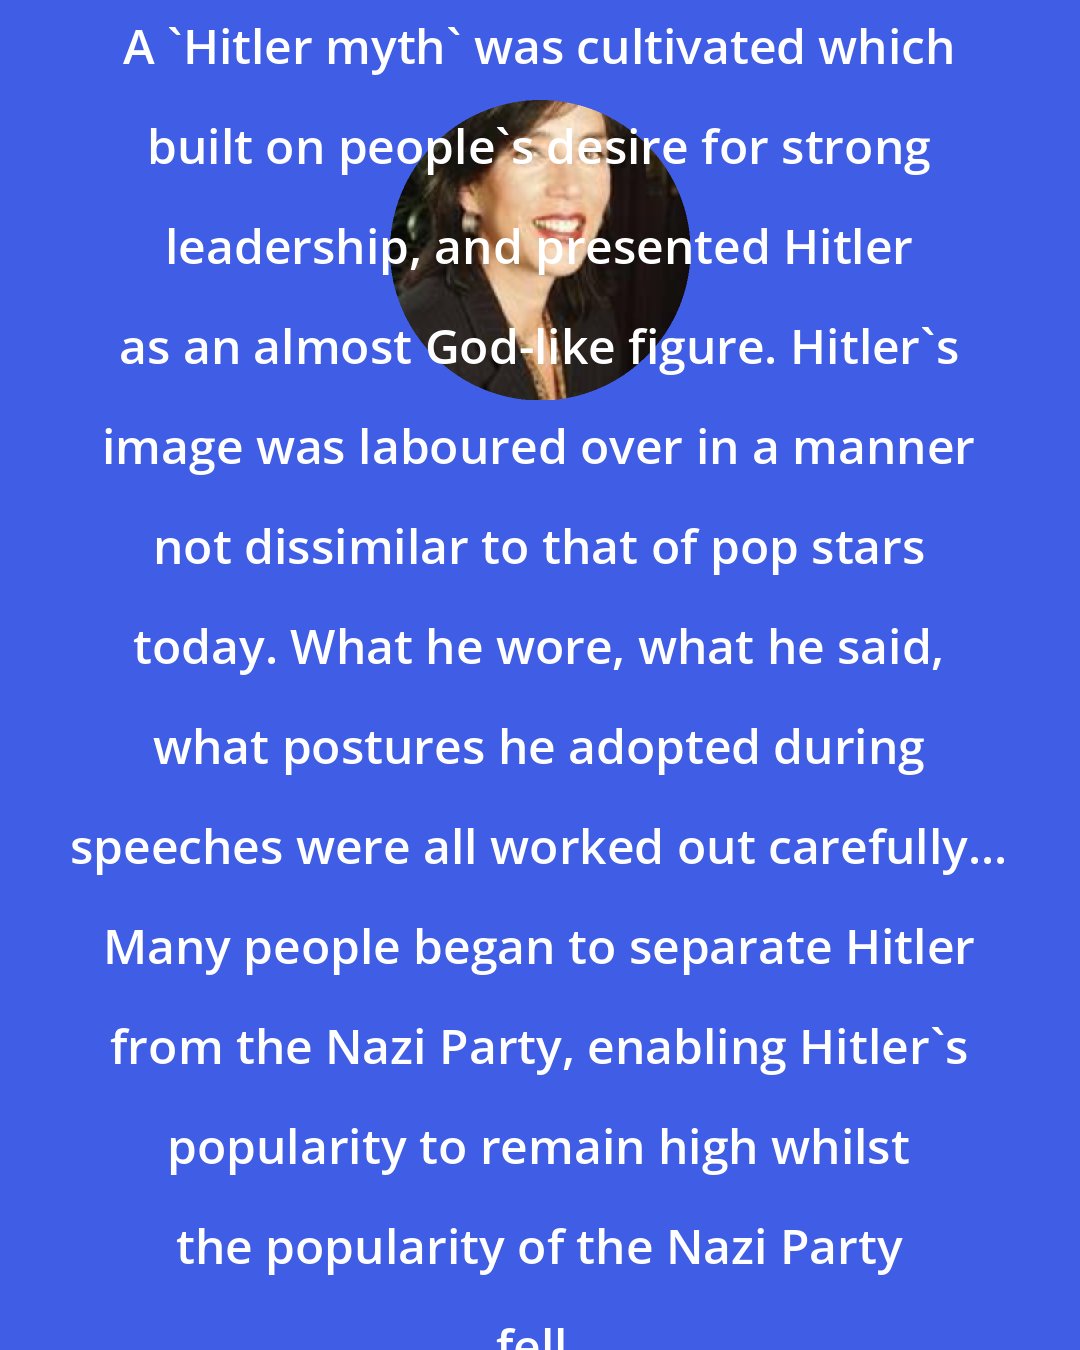 Alison Kitson: A 'Hitler myth' was cultivated which built on people's desire for strong leadership, and presented Hitler as an almost God-like figure. Hitler's image was laboured over in a manner not dissimilar to that of pop stars today. What he wore, what he said, what postures he adopted during speeches were all worked out carefully... Many people began to separate Hitler from the Nazi Party, enabling Hitler's popularity to remain high whilst the popularity of the Nazi Party fell.